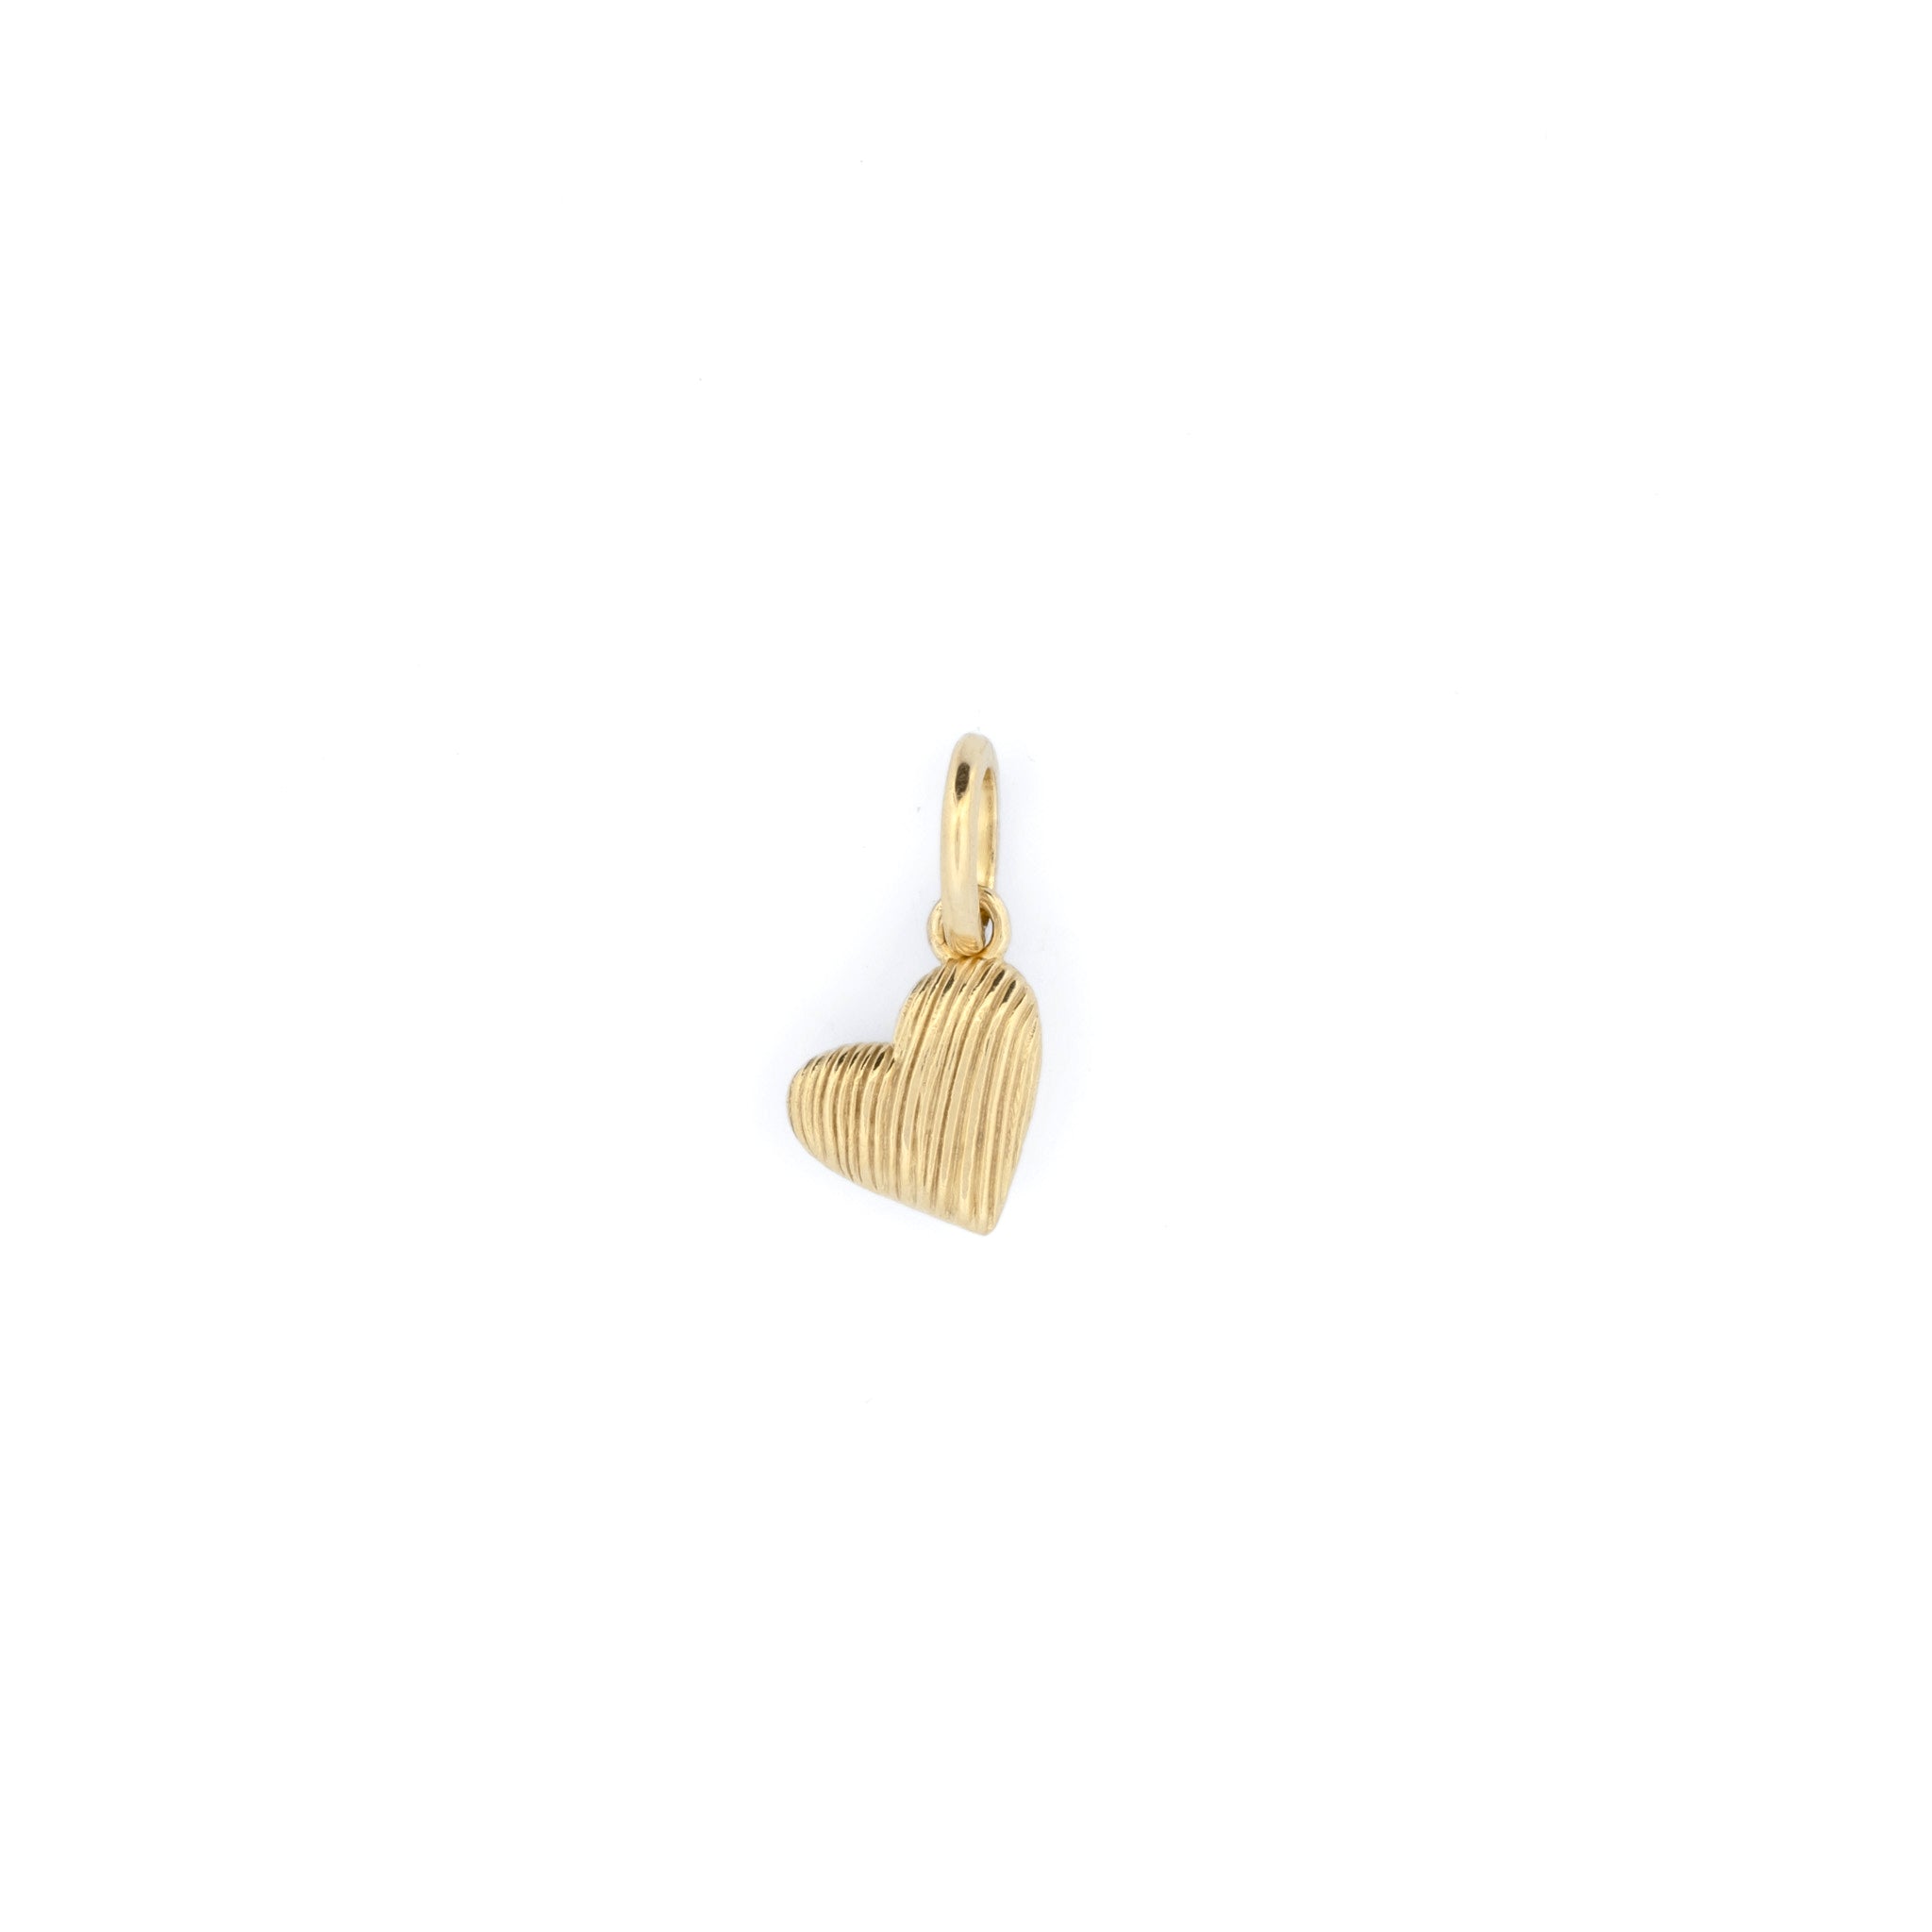 An Aiden Jae Mini Reversible Heart Charm on a white background.